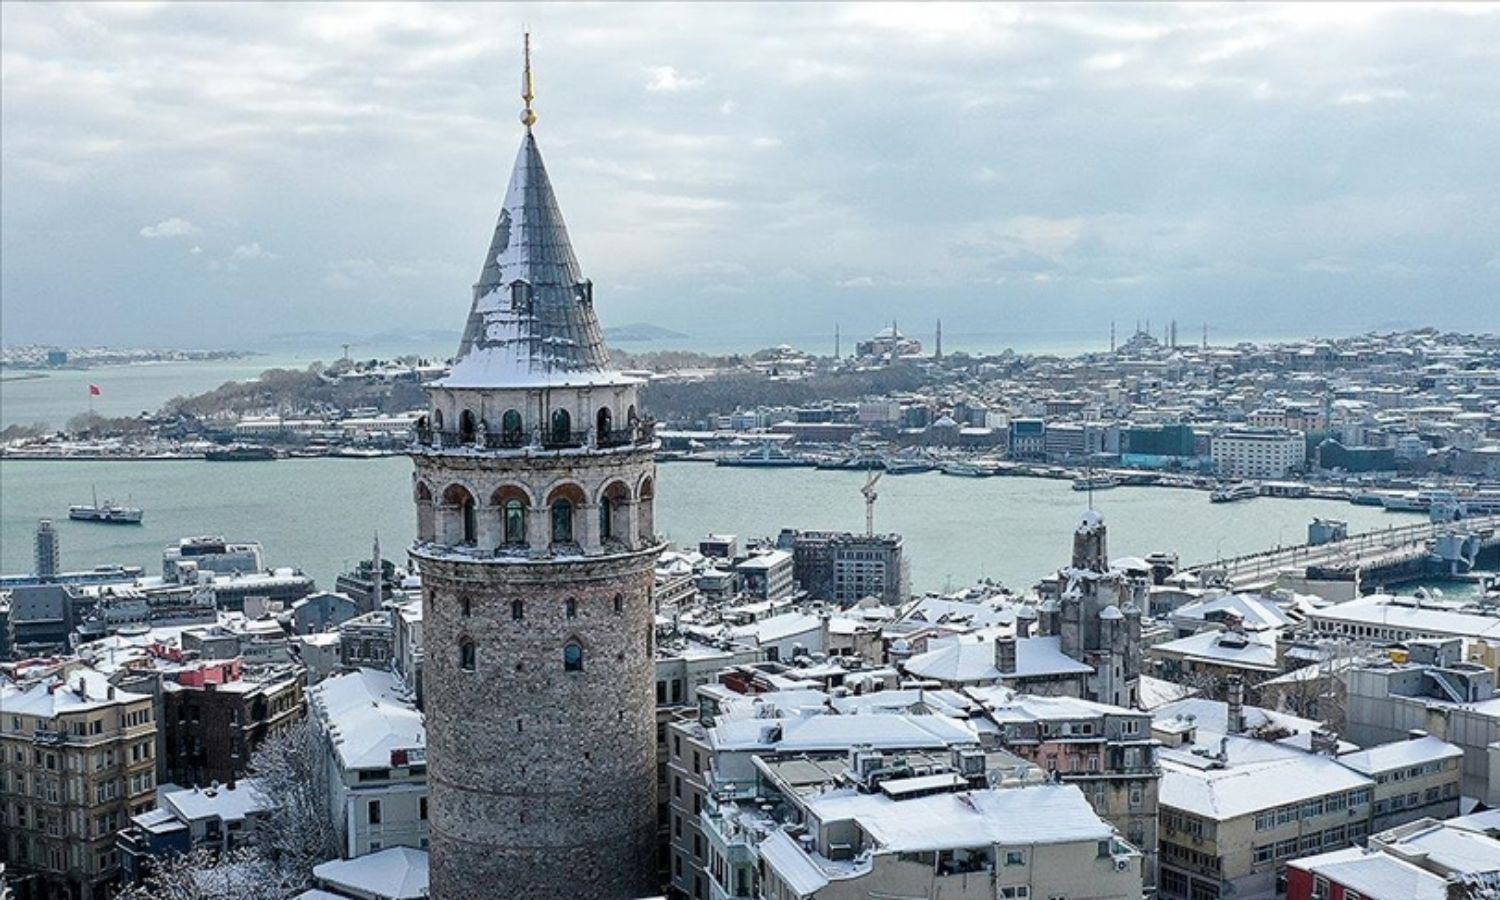 House prices in Istanbul, Istanbul real estate, living in Istanbul, residence in Istanbul, residence and living in Istanbul, social life in Istanbul, services in Istanbul